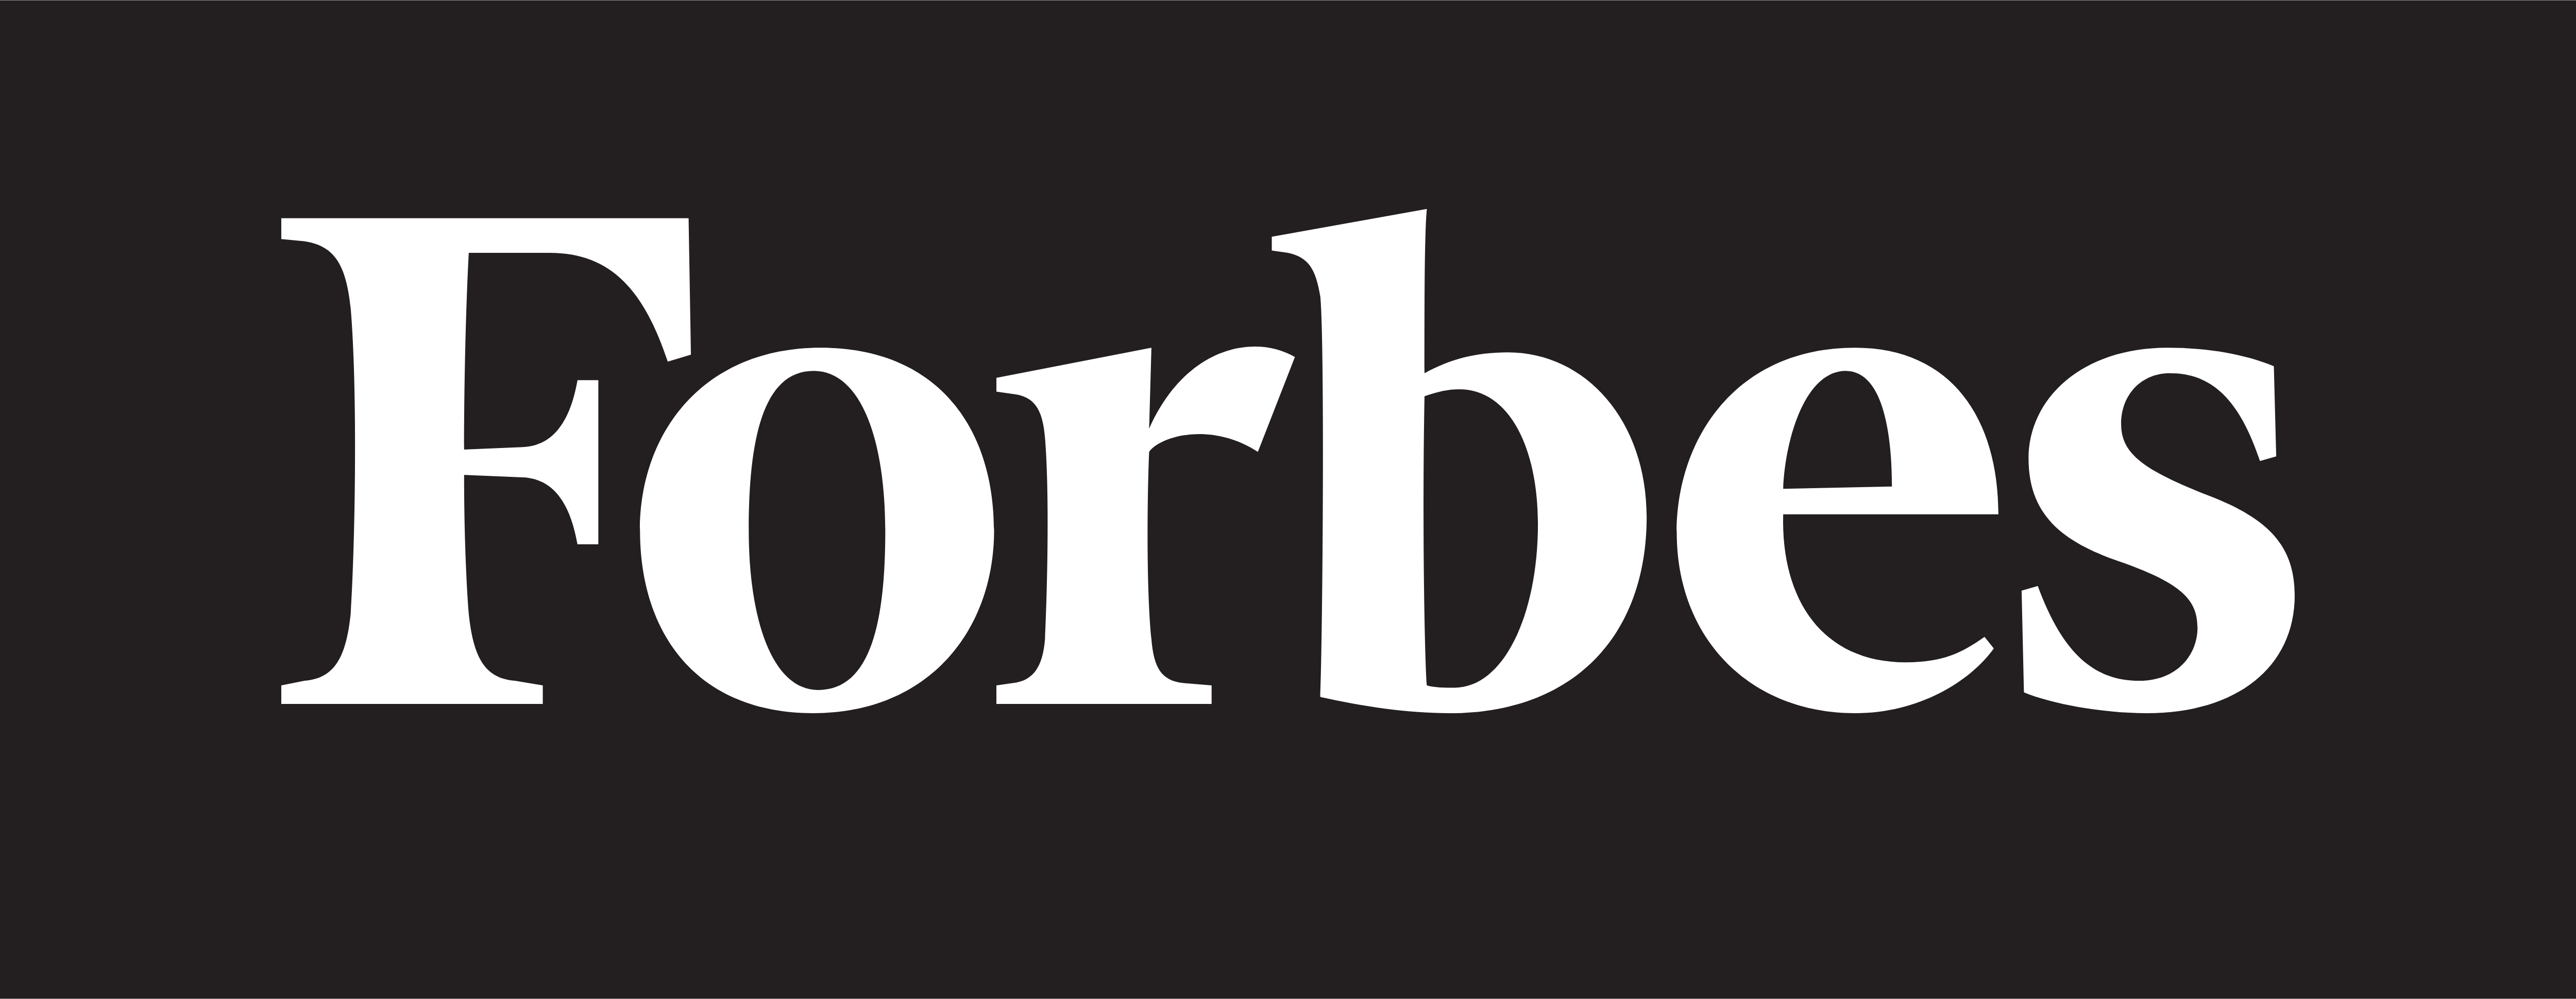 Forbes – Scarica loghi